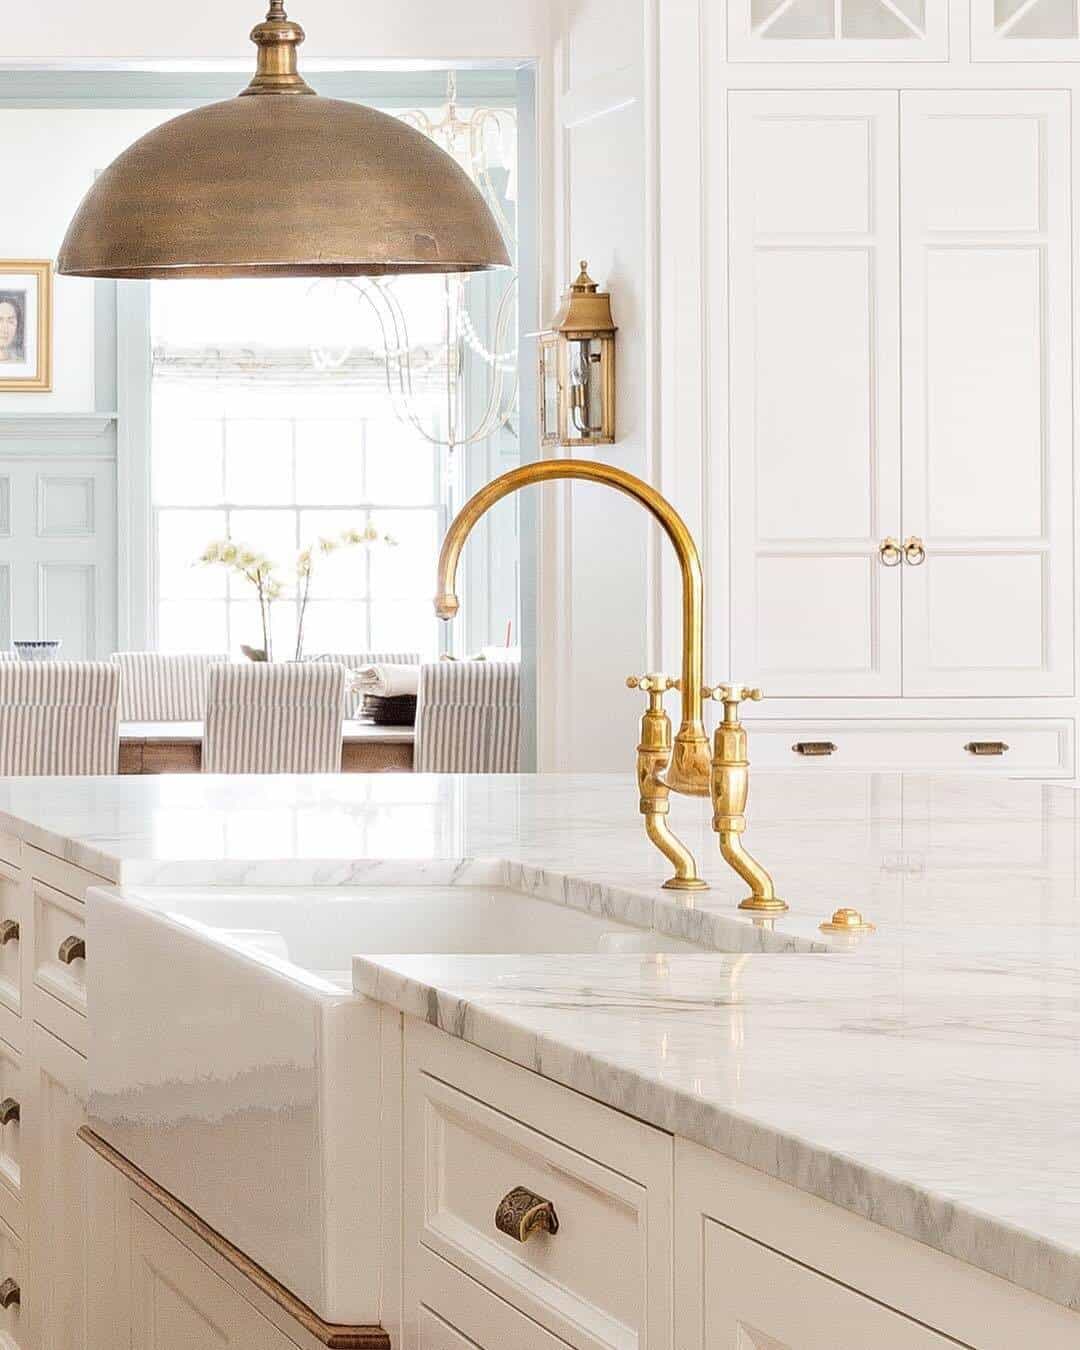 golden faucet in a kitchen with white interiors, sink, and a lamp